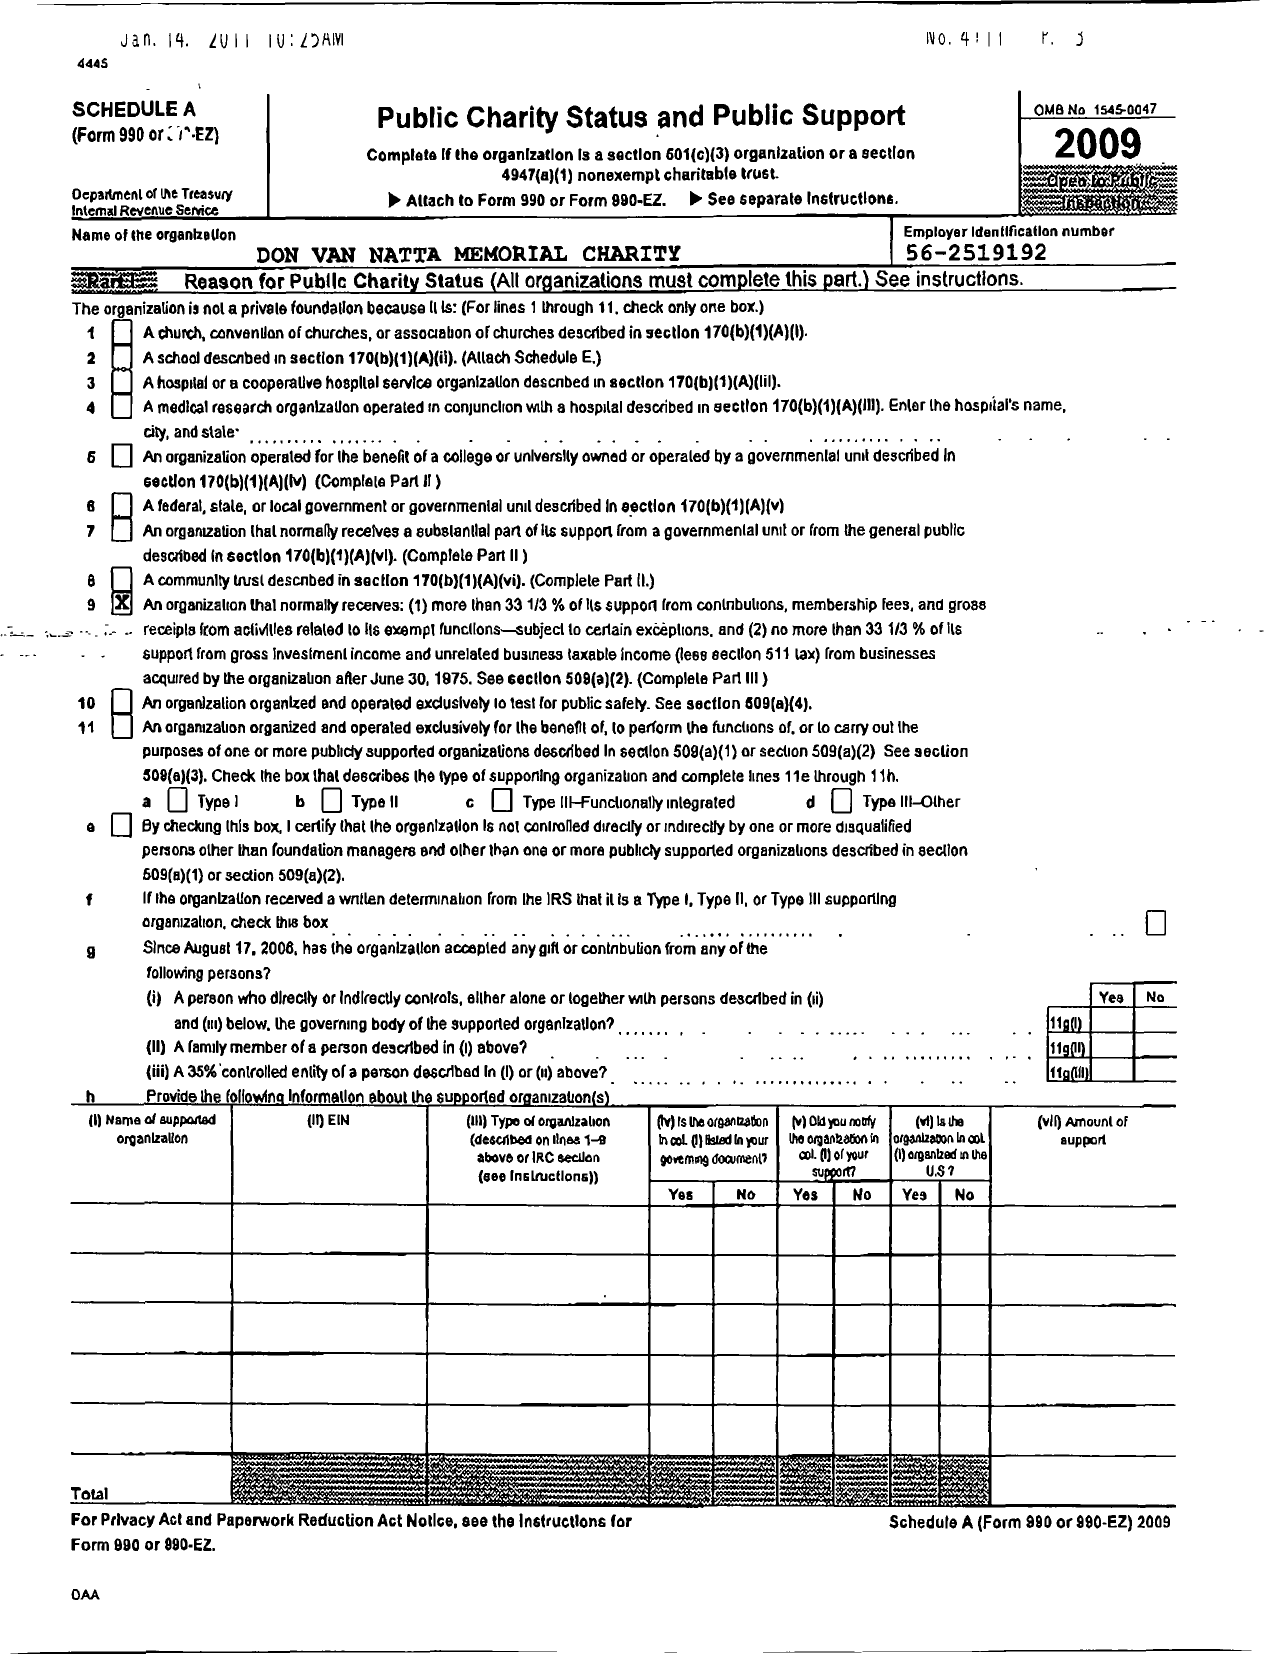 Image of first page of 2009 Form 990R for Don Van Natta Memorial Charity